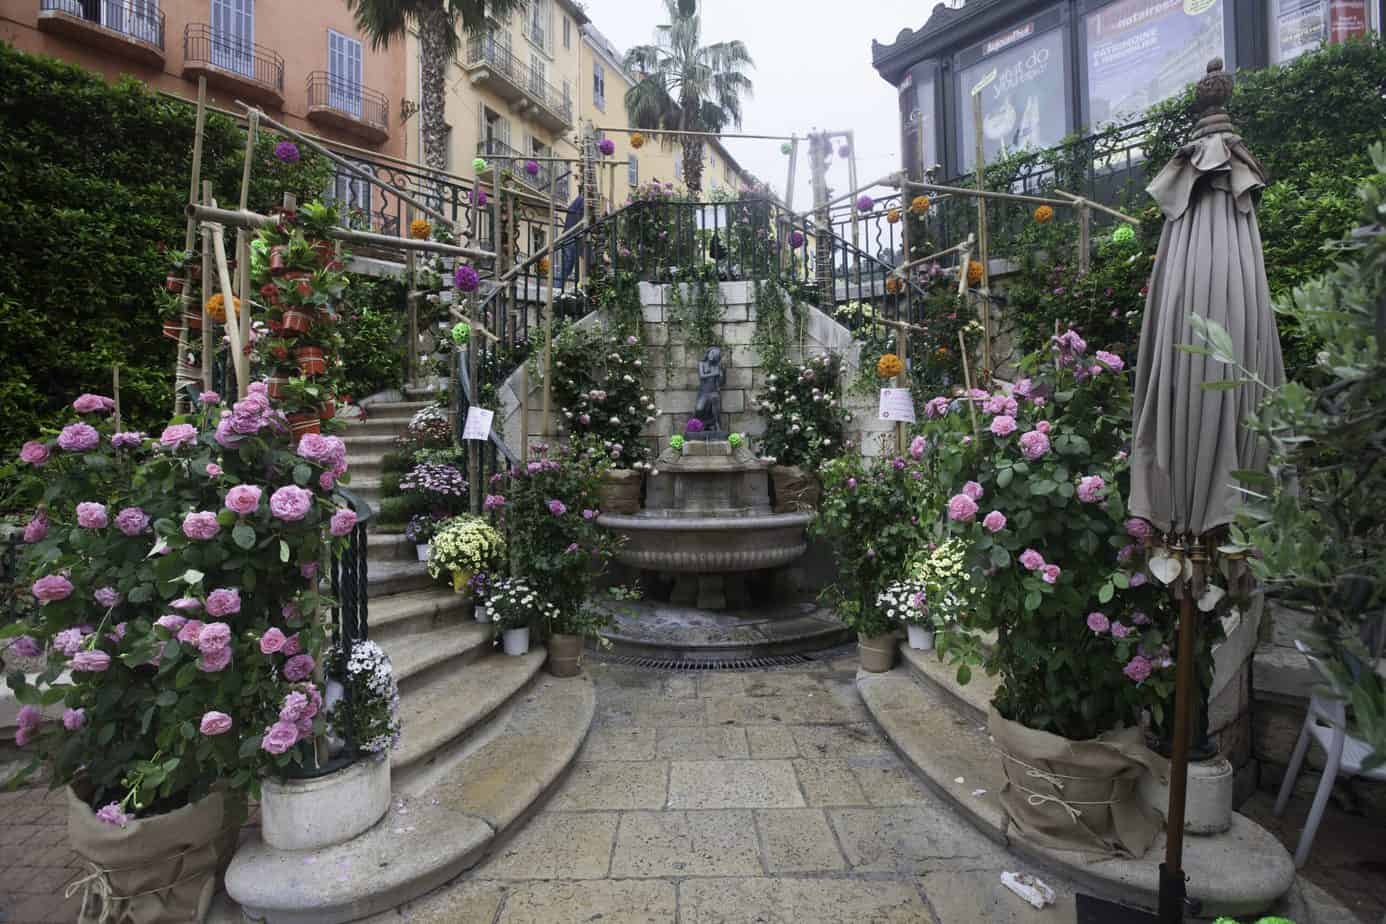 Take a virtual tour of the Chanel flower fields in Grasse, France